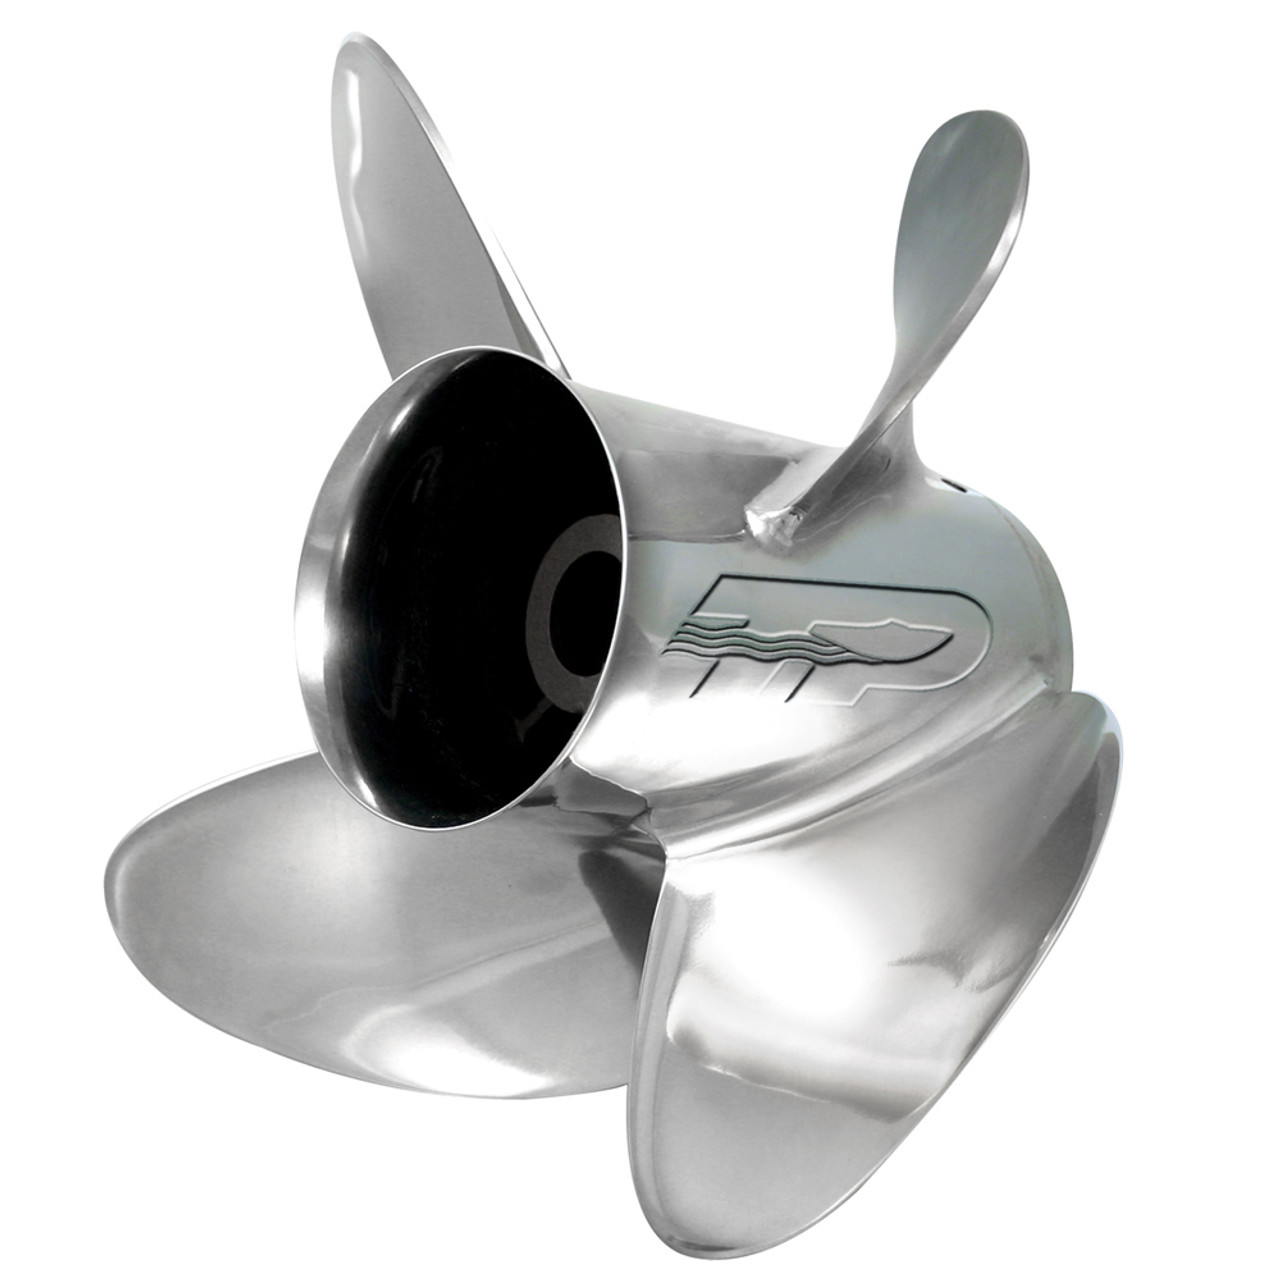 Turning Point Express Stainless Steel Left-Hand Propeller - 15 x 15 - 4-Blade